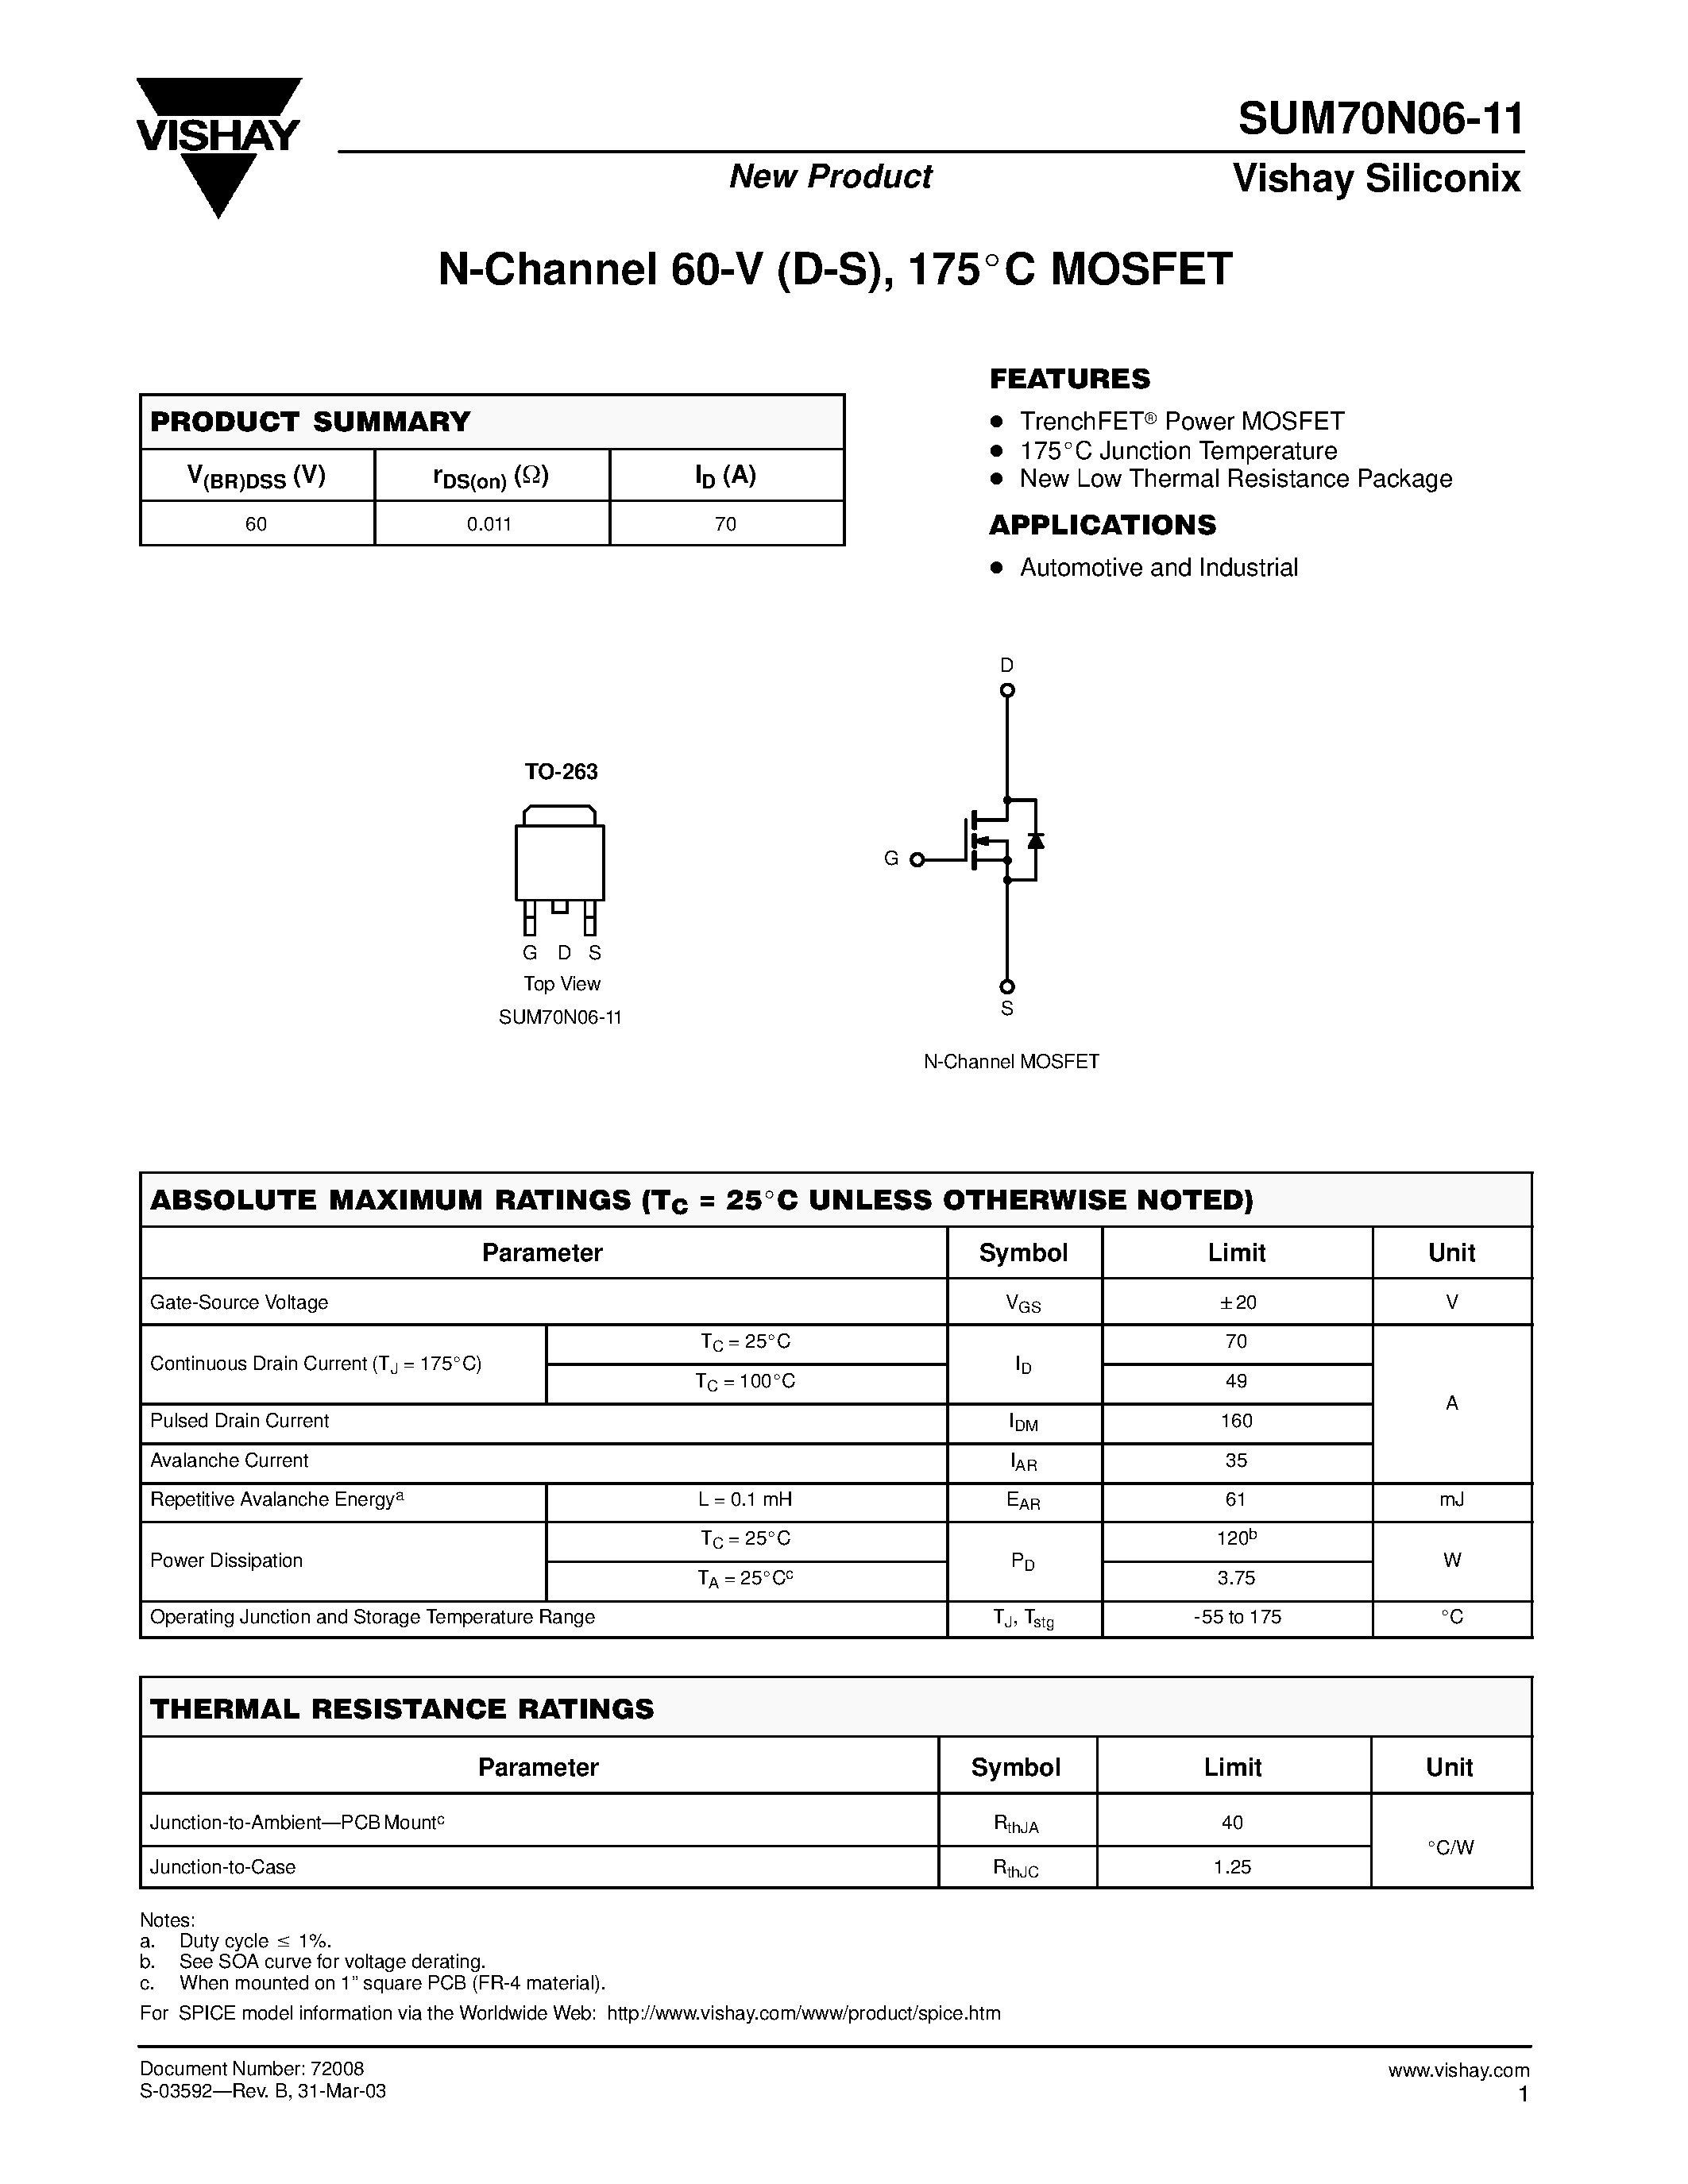 Datasheet SUM70N06-11 - N-Channel 60-V (D-S) 175 C MOSFET page 1